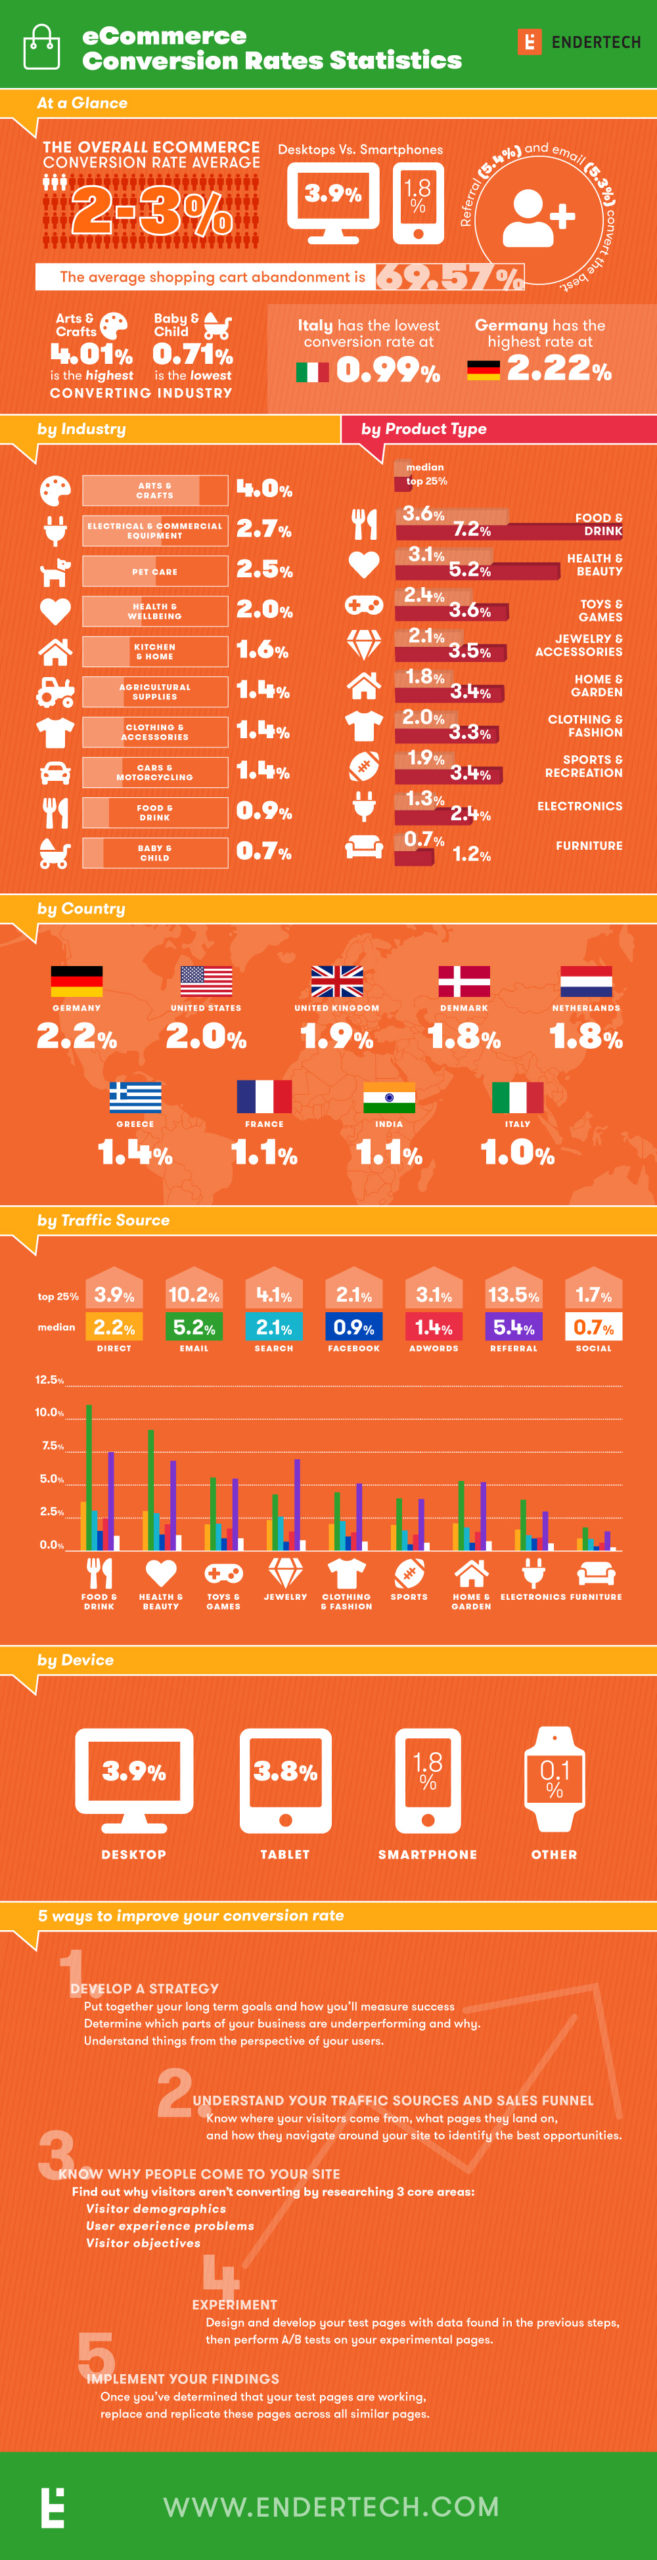 eCommerce conversion rate infographic